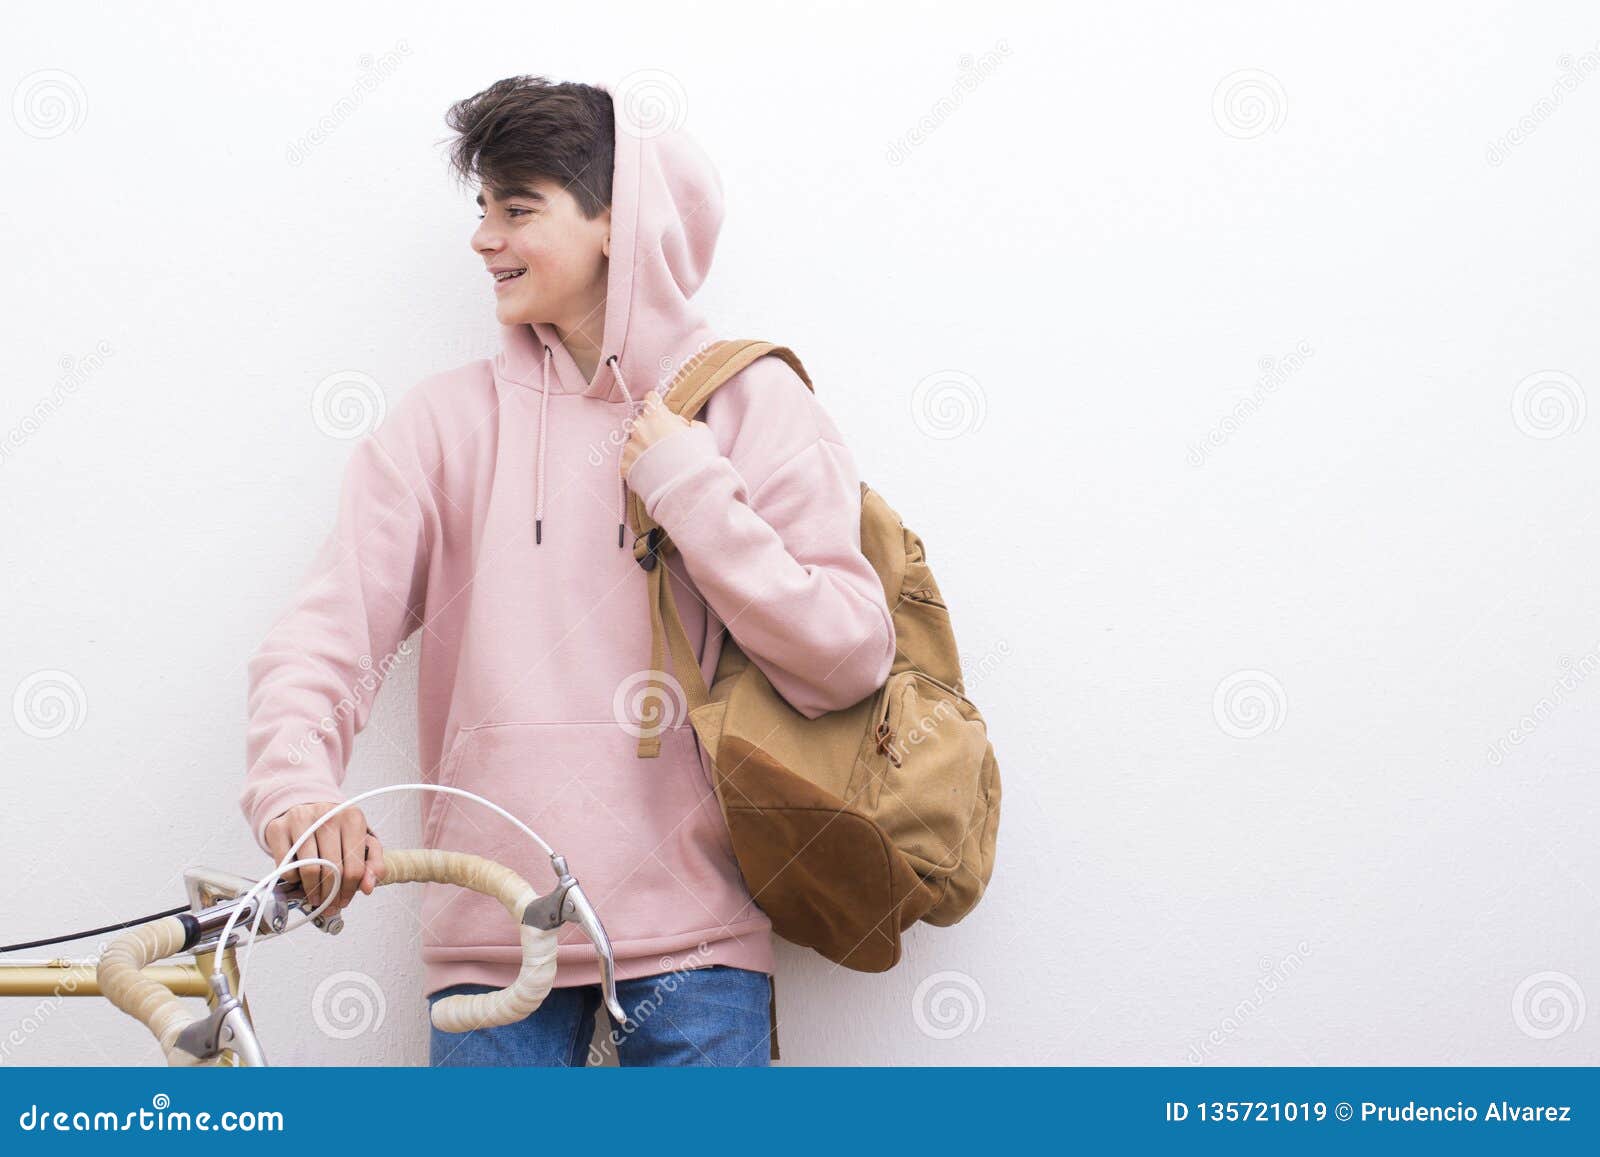 Young Student with Backpack and Bicycle Stock Image - Image of student ...